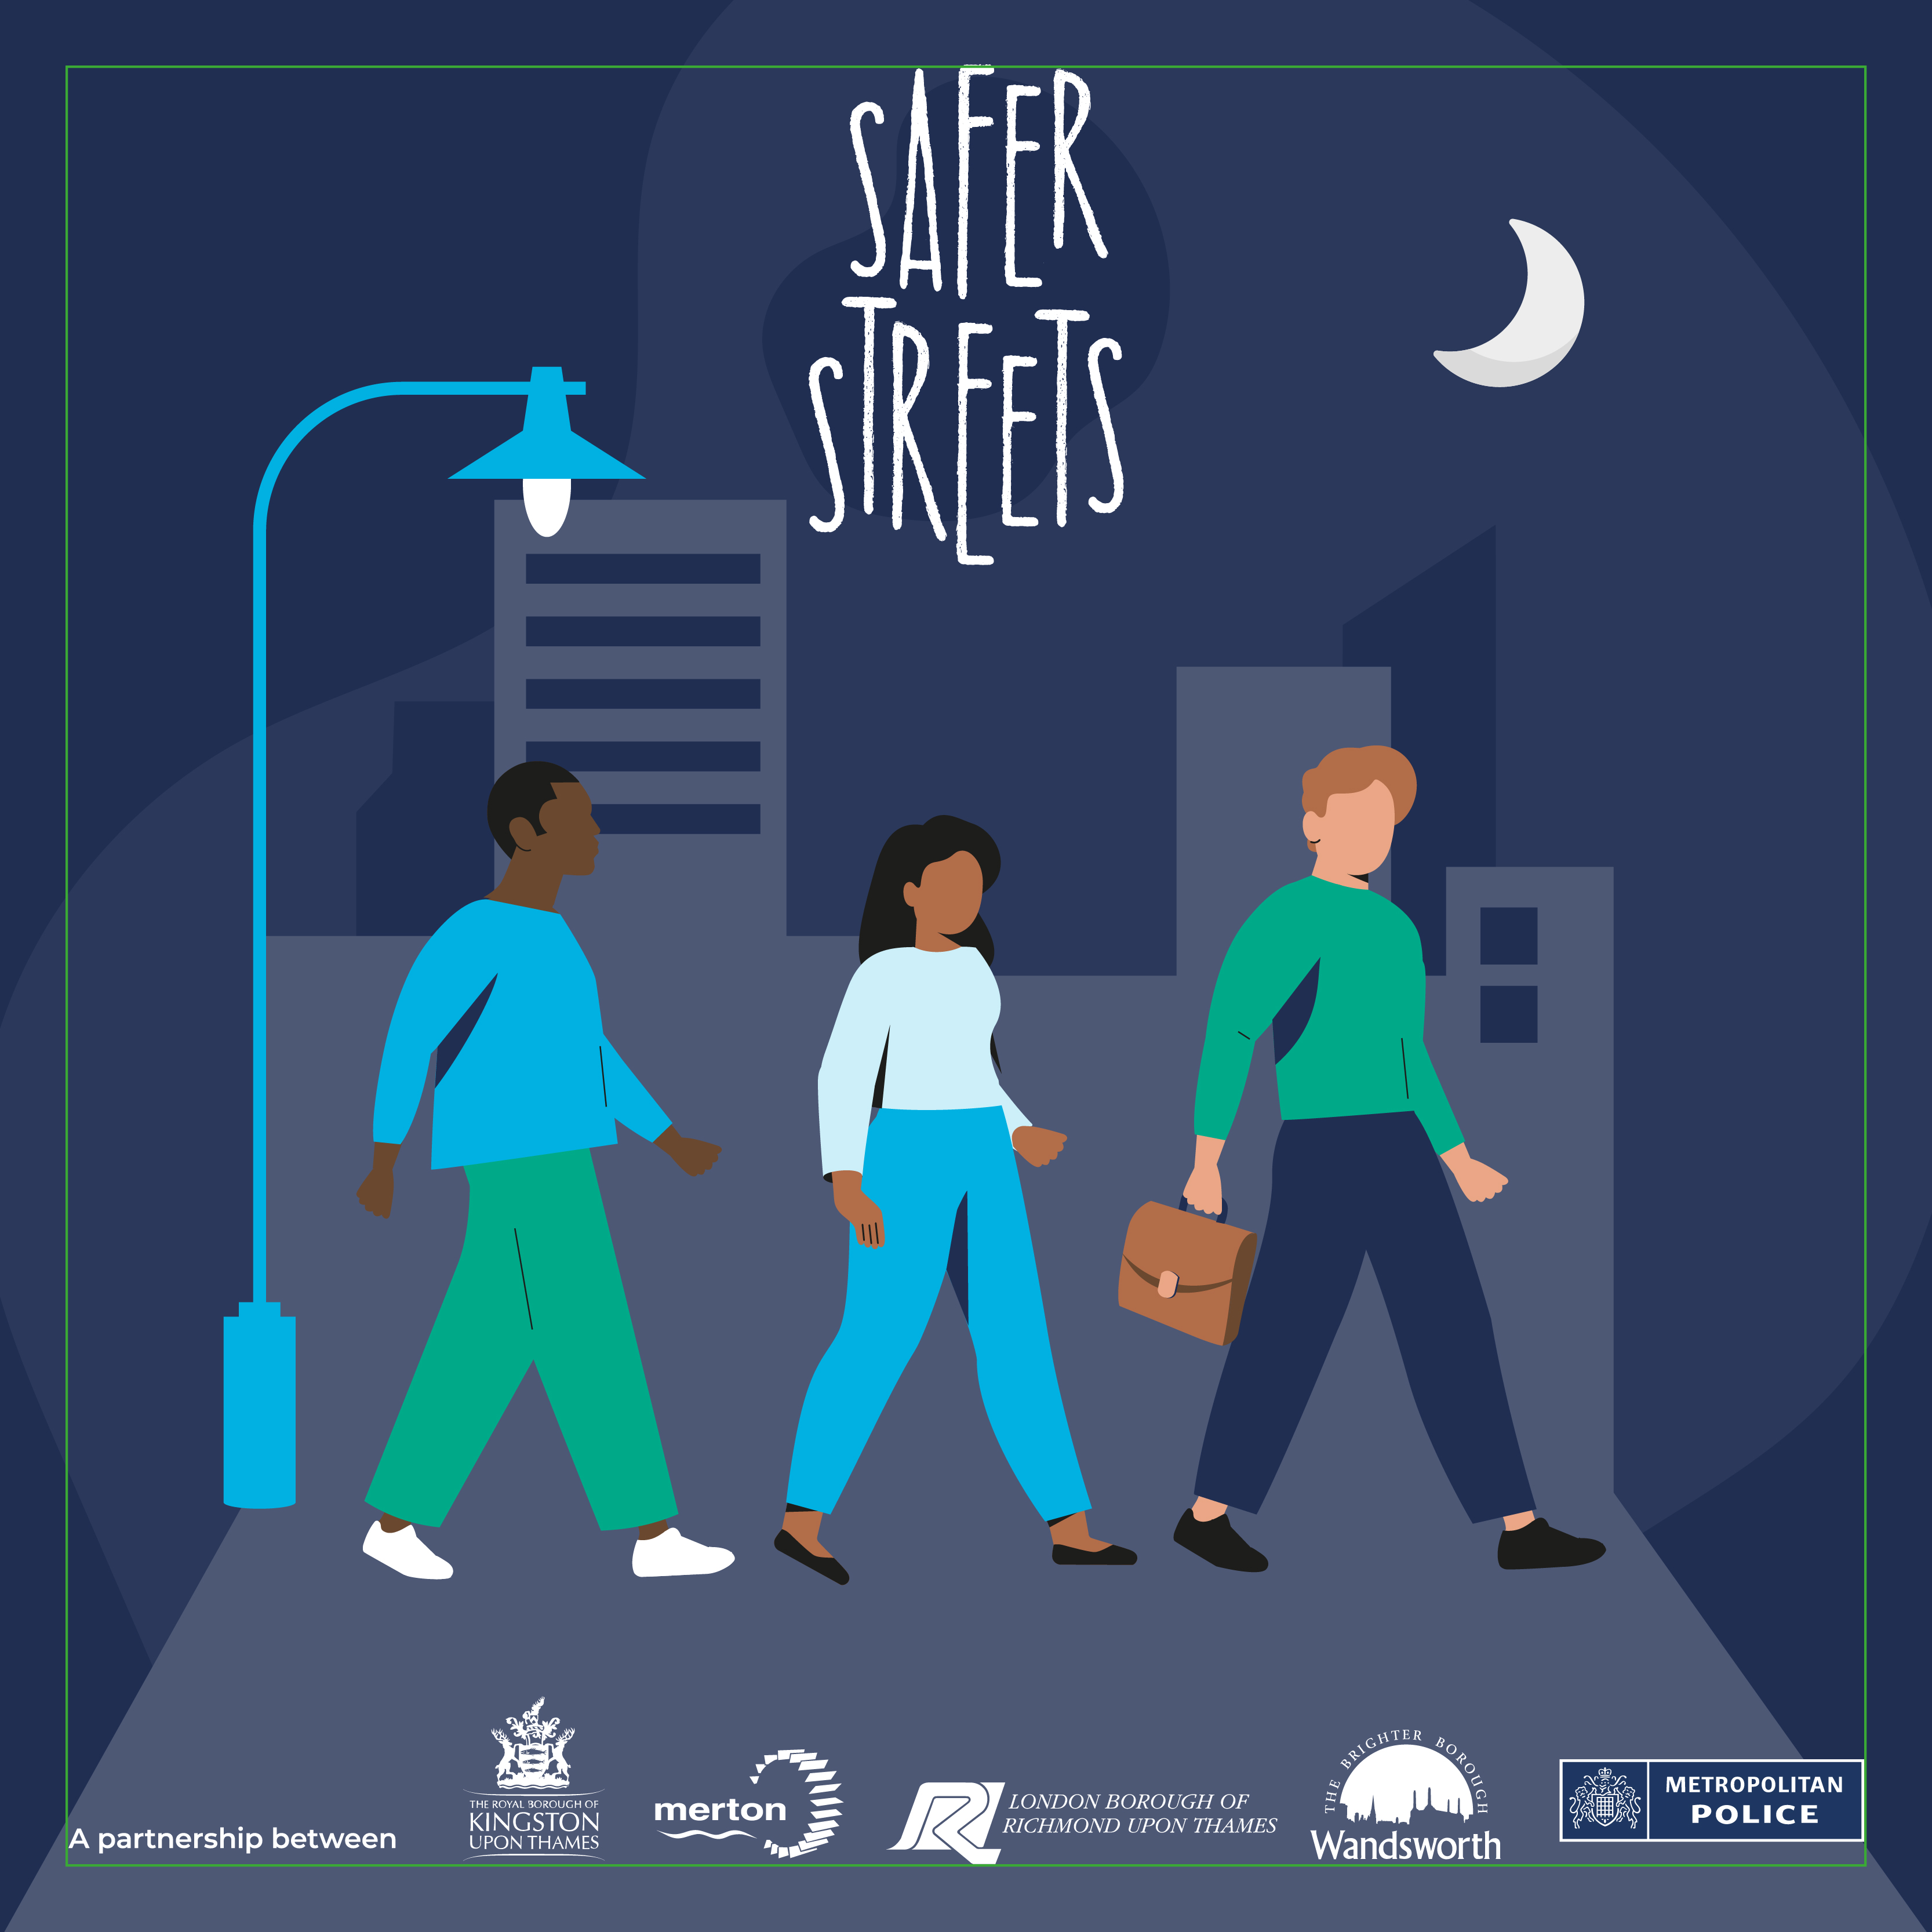 Safer Streets campaign visual. Three people walking.